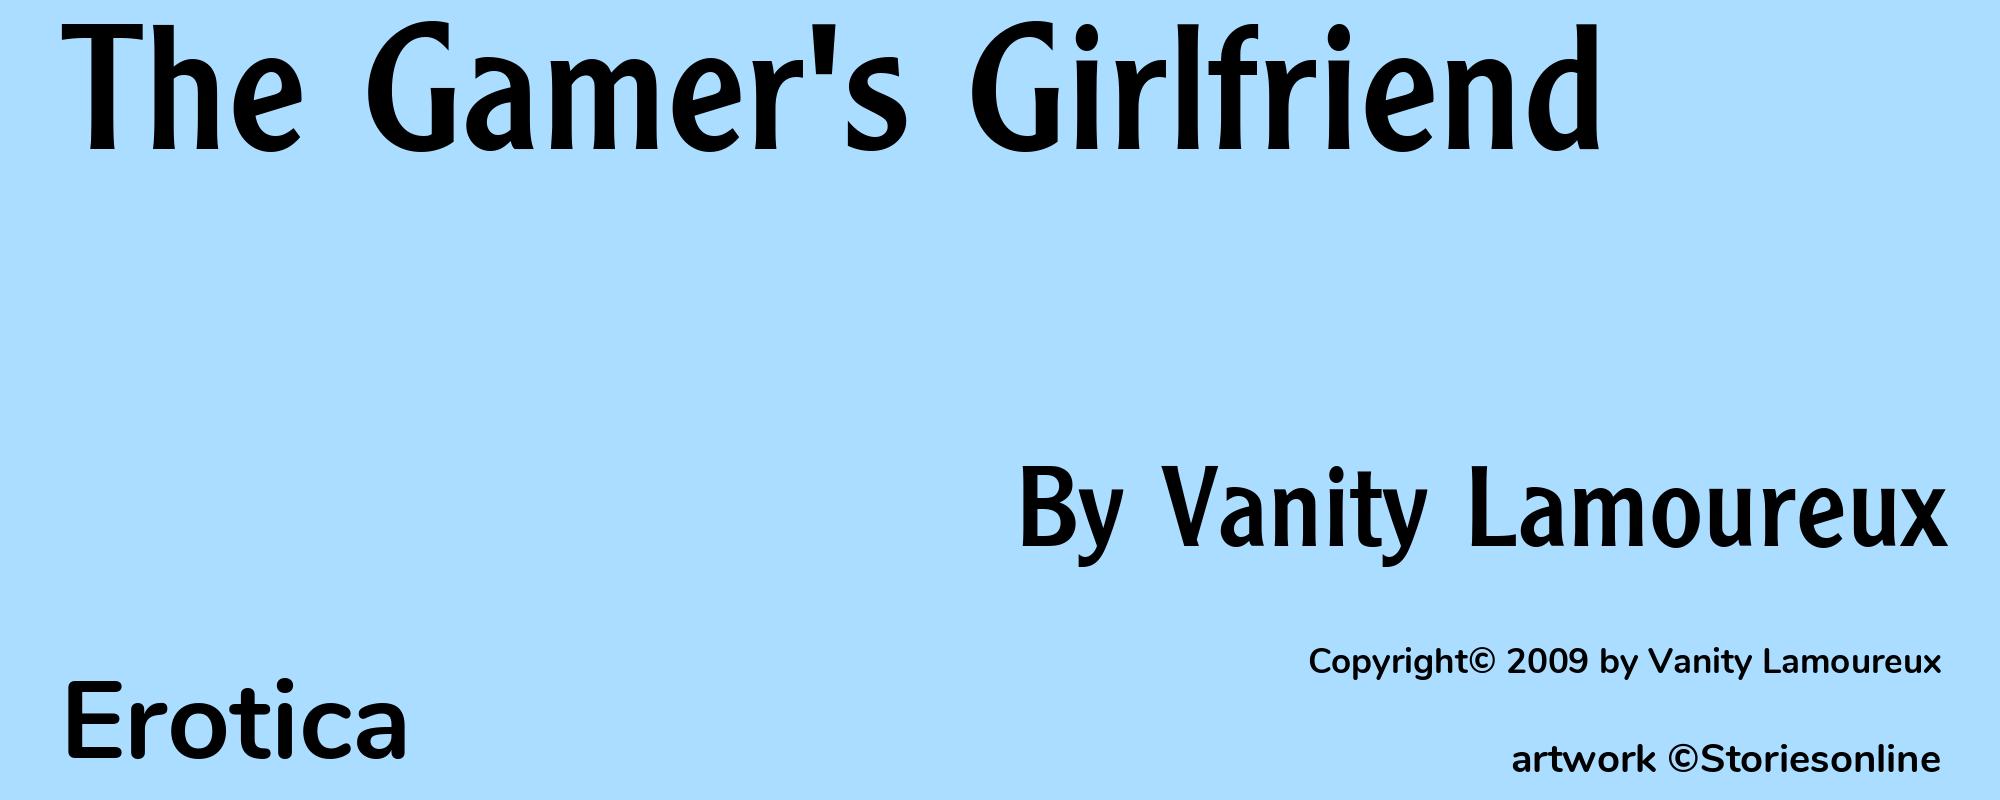 The Gamer's Girlfriend - Cover